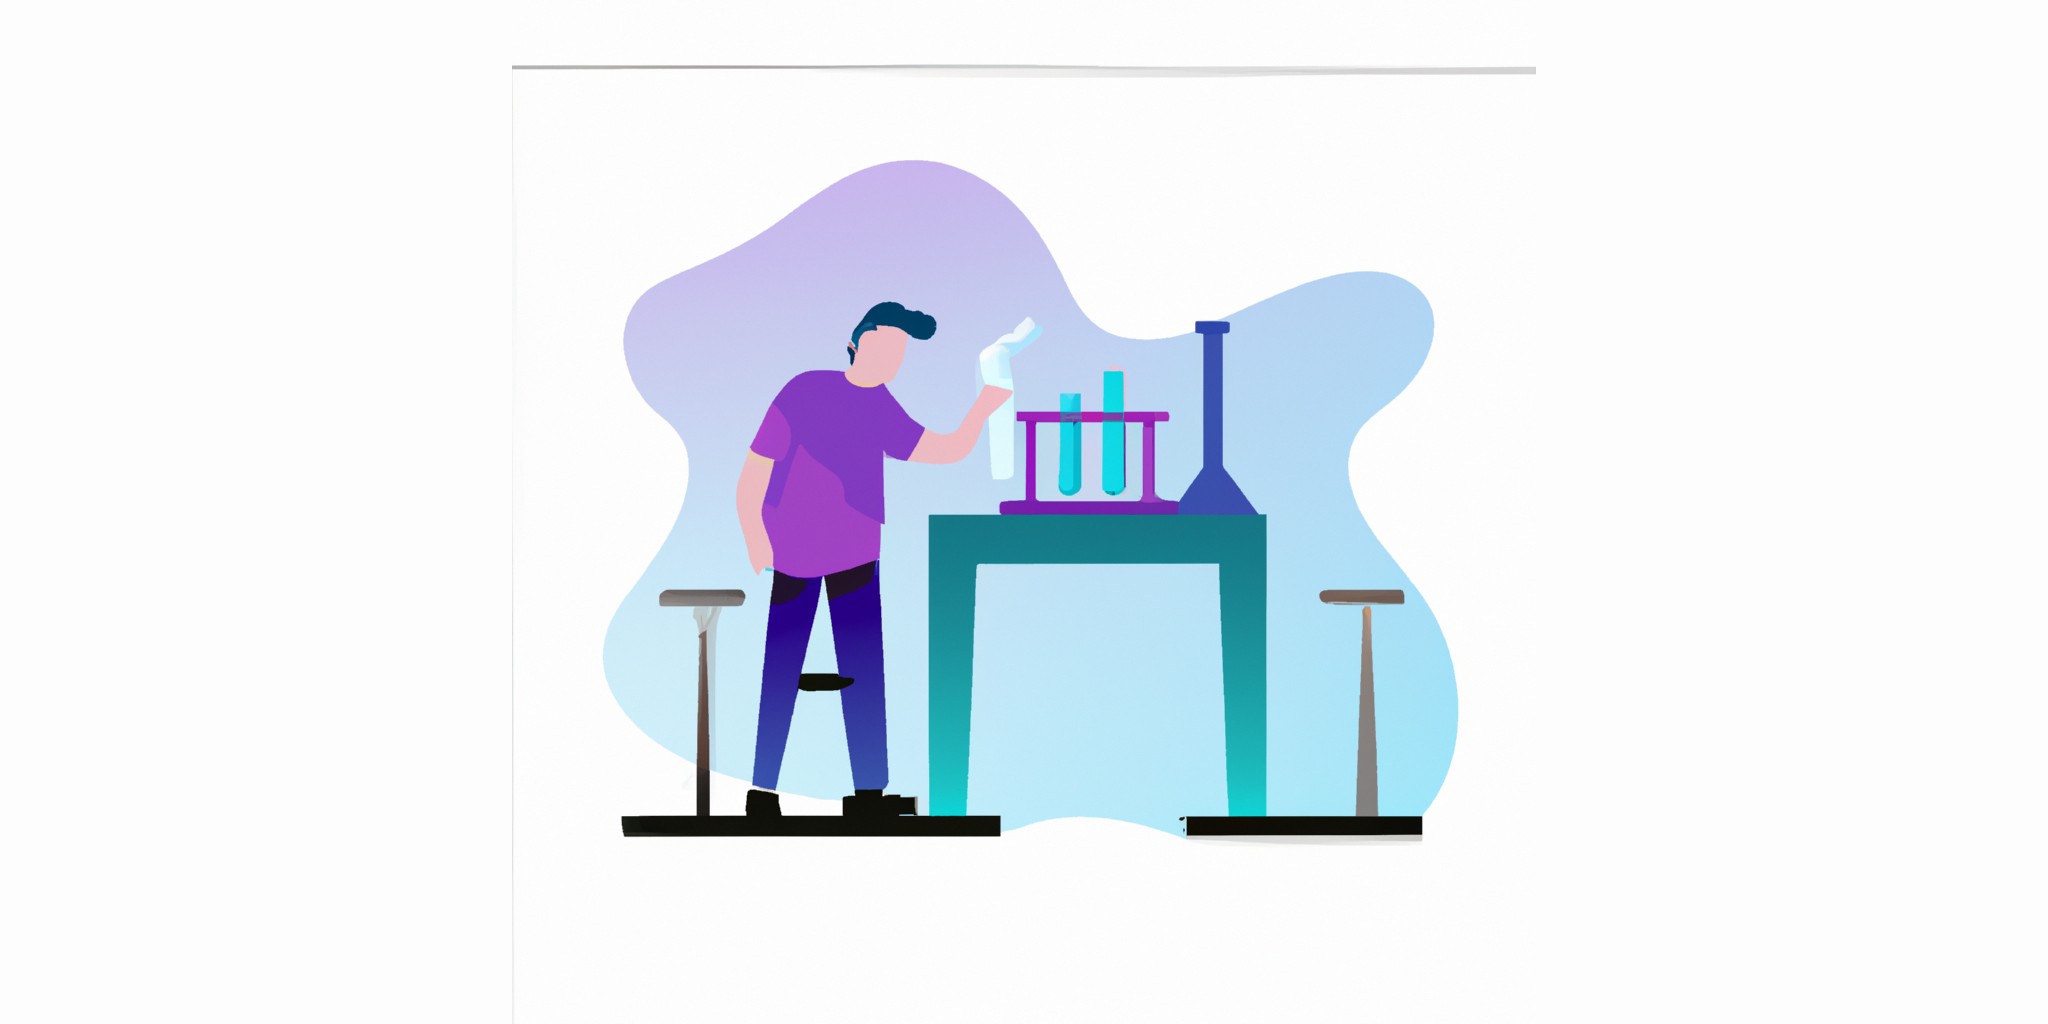 a experiment lab with a person in front in flat illustration style with gradients and white background